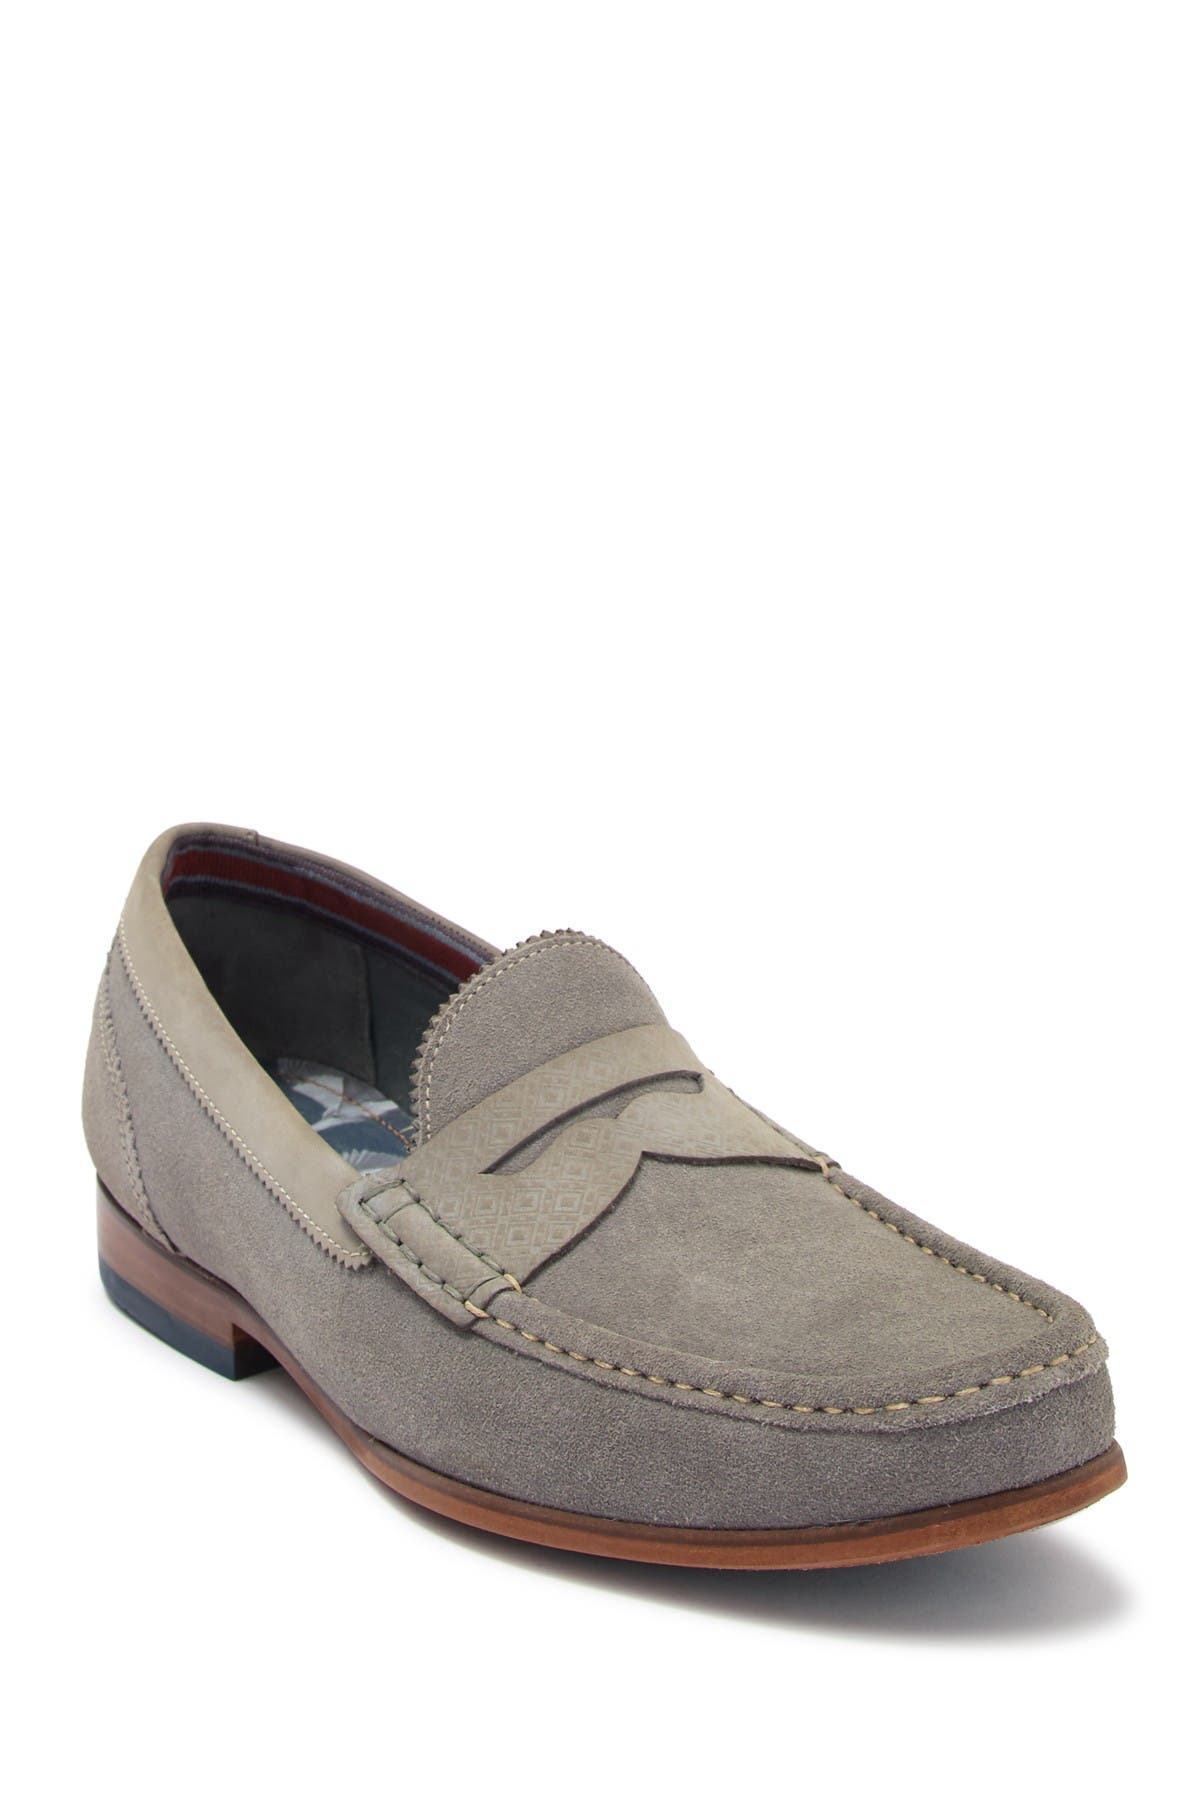 boys ted baker loafers